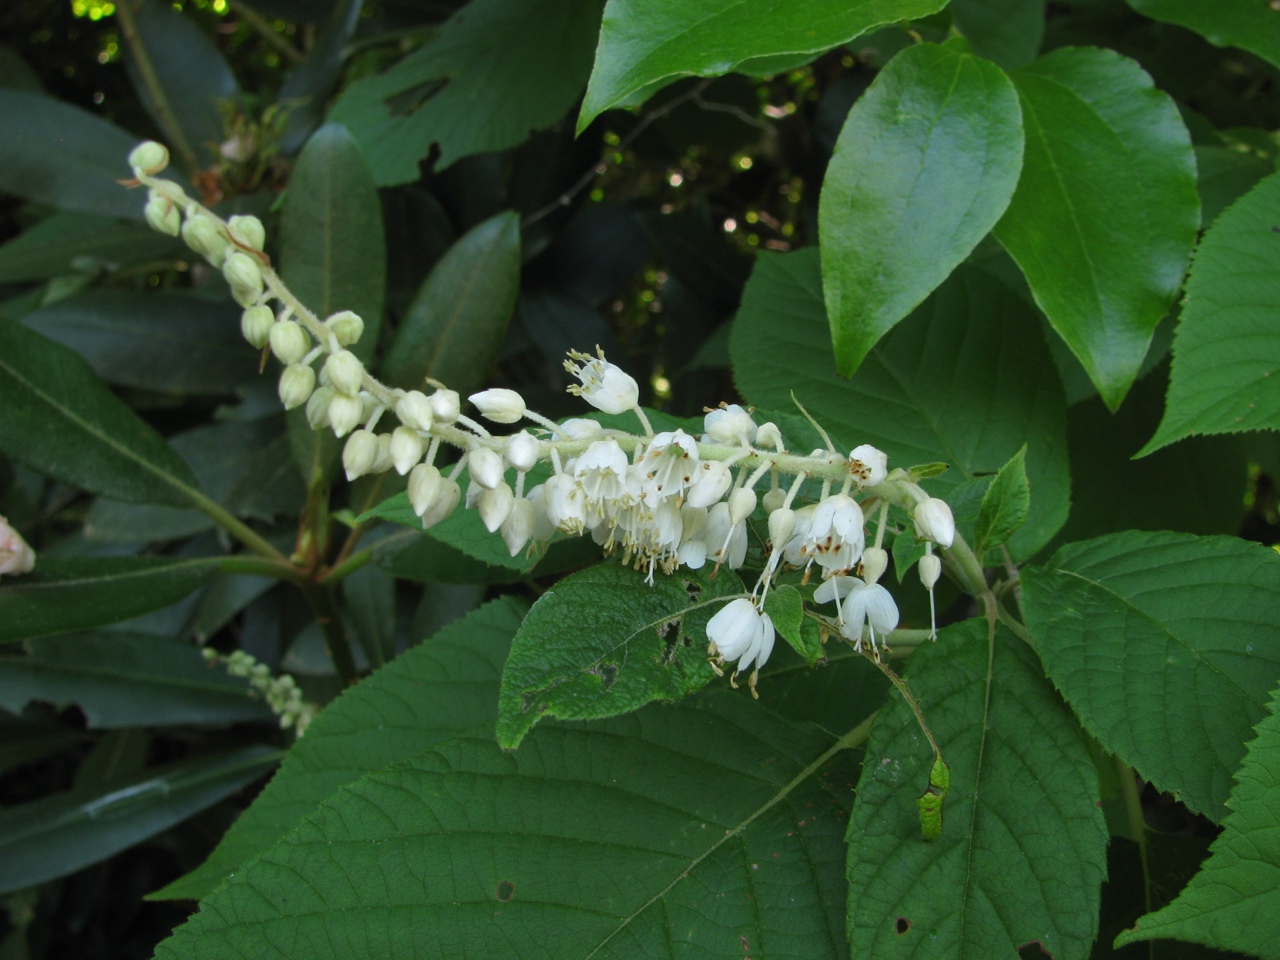 The Scientific Name is Clethra acuminata. You will likely hear them called Mountain Sweet-pepperbush, Mountain White-alder. This picture shows the Flowers are born on 3-8 inch long drooping racemes that bloom from the base to the tip of Clethra acuminata